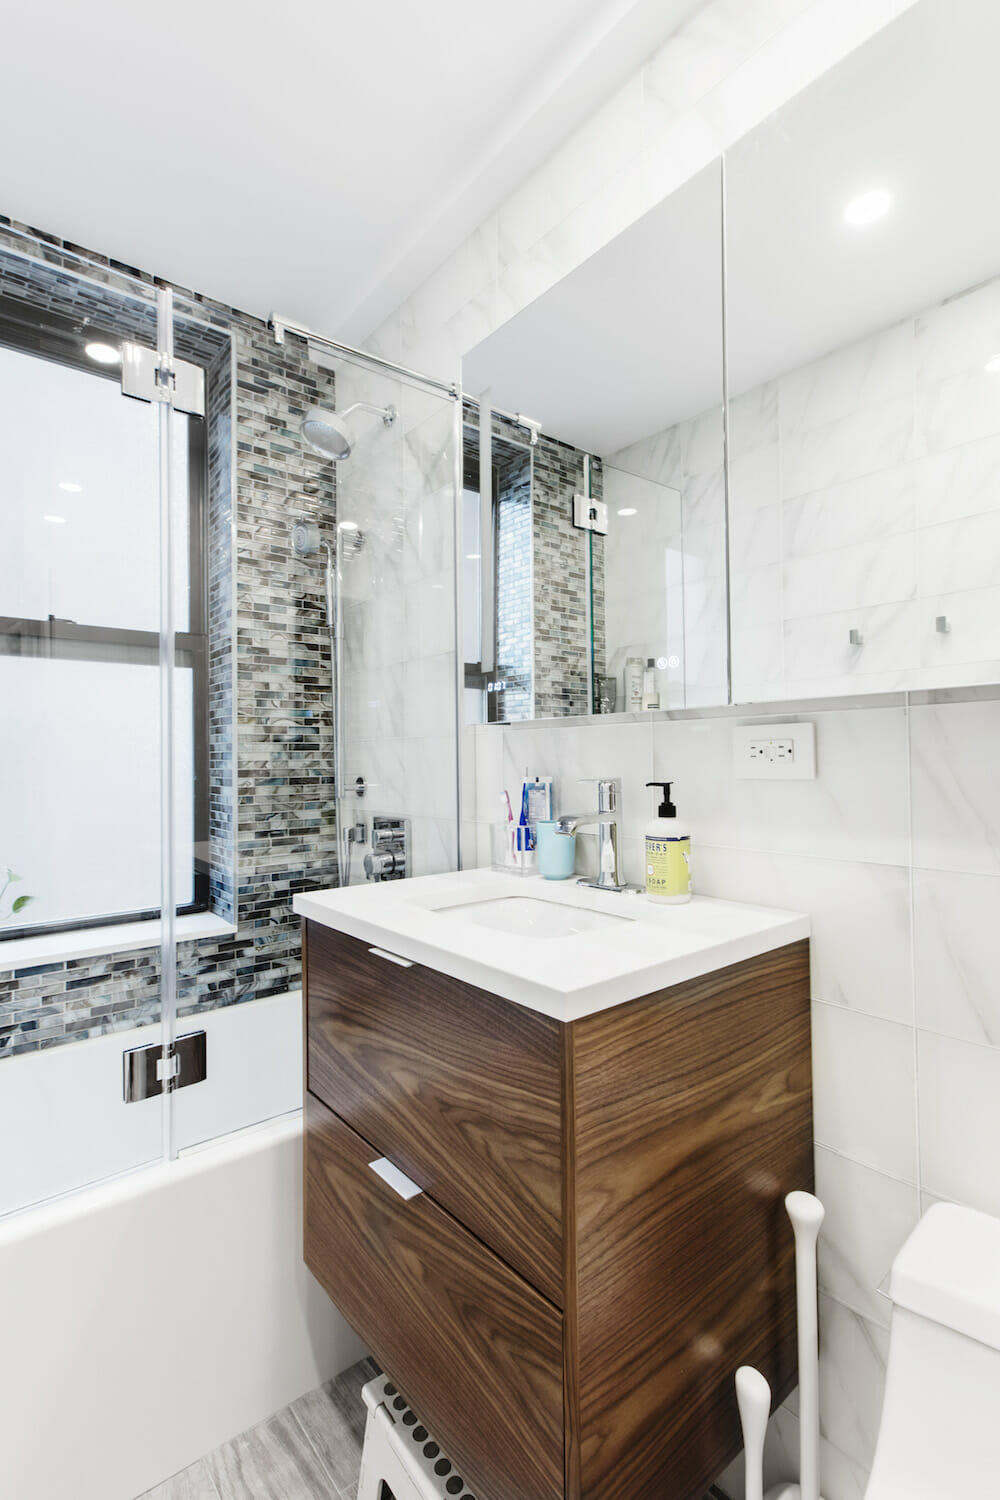 floating wooden bathroom vanity with white countertop and mirror and white tiles on walls and bathtub with mosaic wall tiles and glass door after renovation